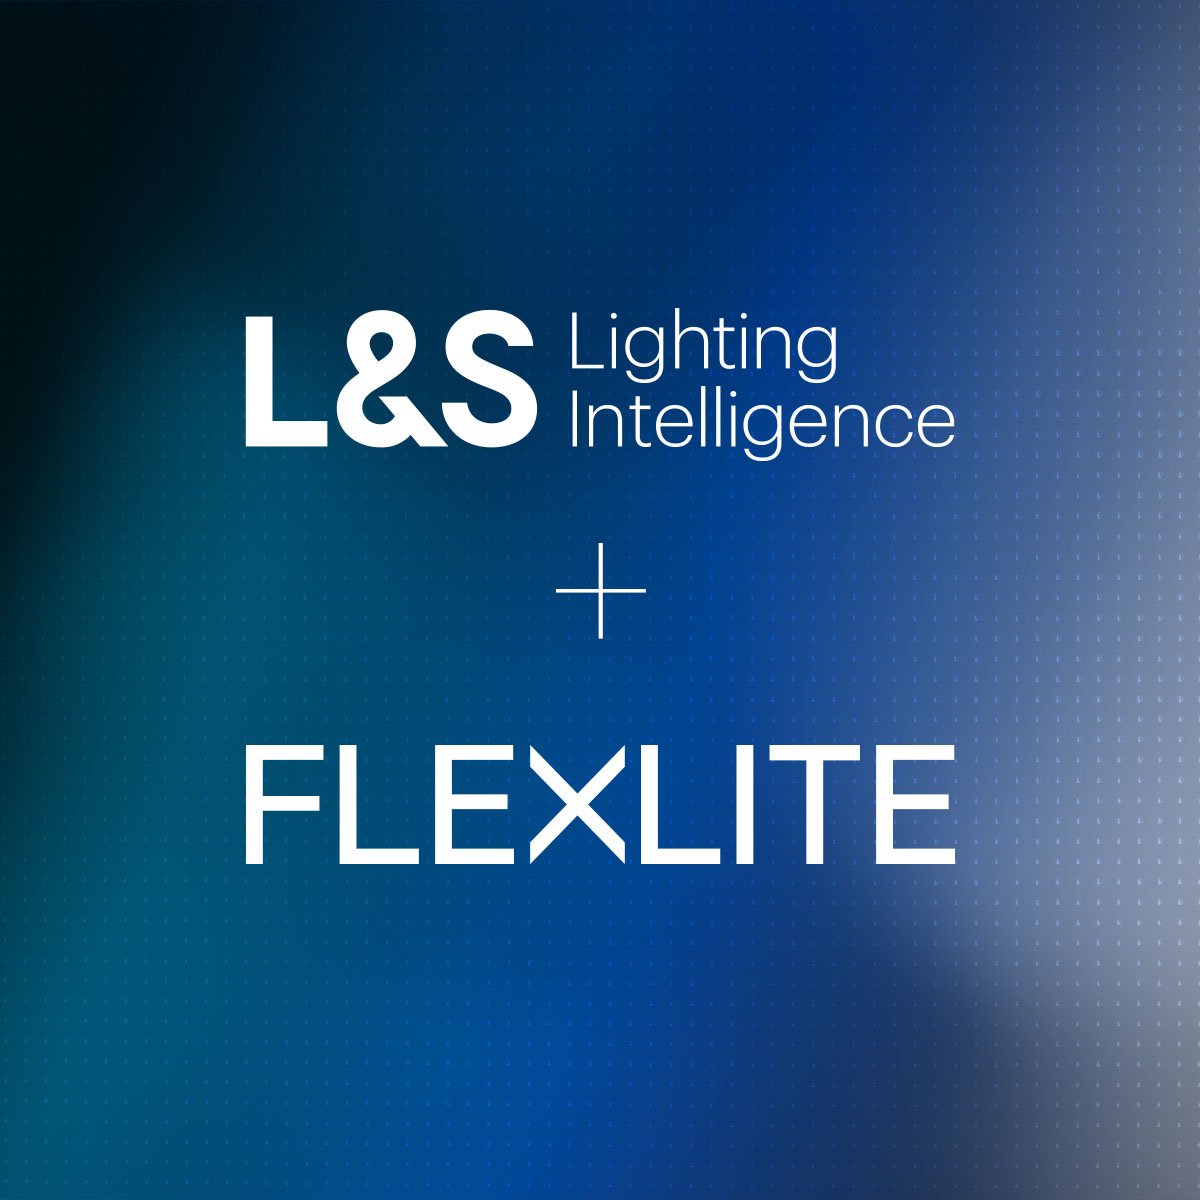 L&S strengthens its leadership in the Design and Production of LED Lighting  Panels and Light Boxes with the Flexlite brand